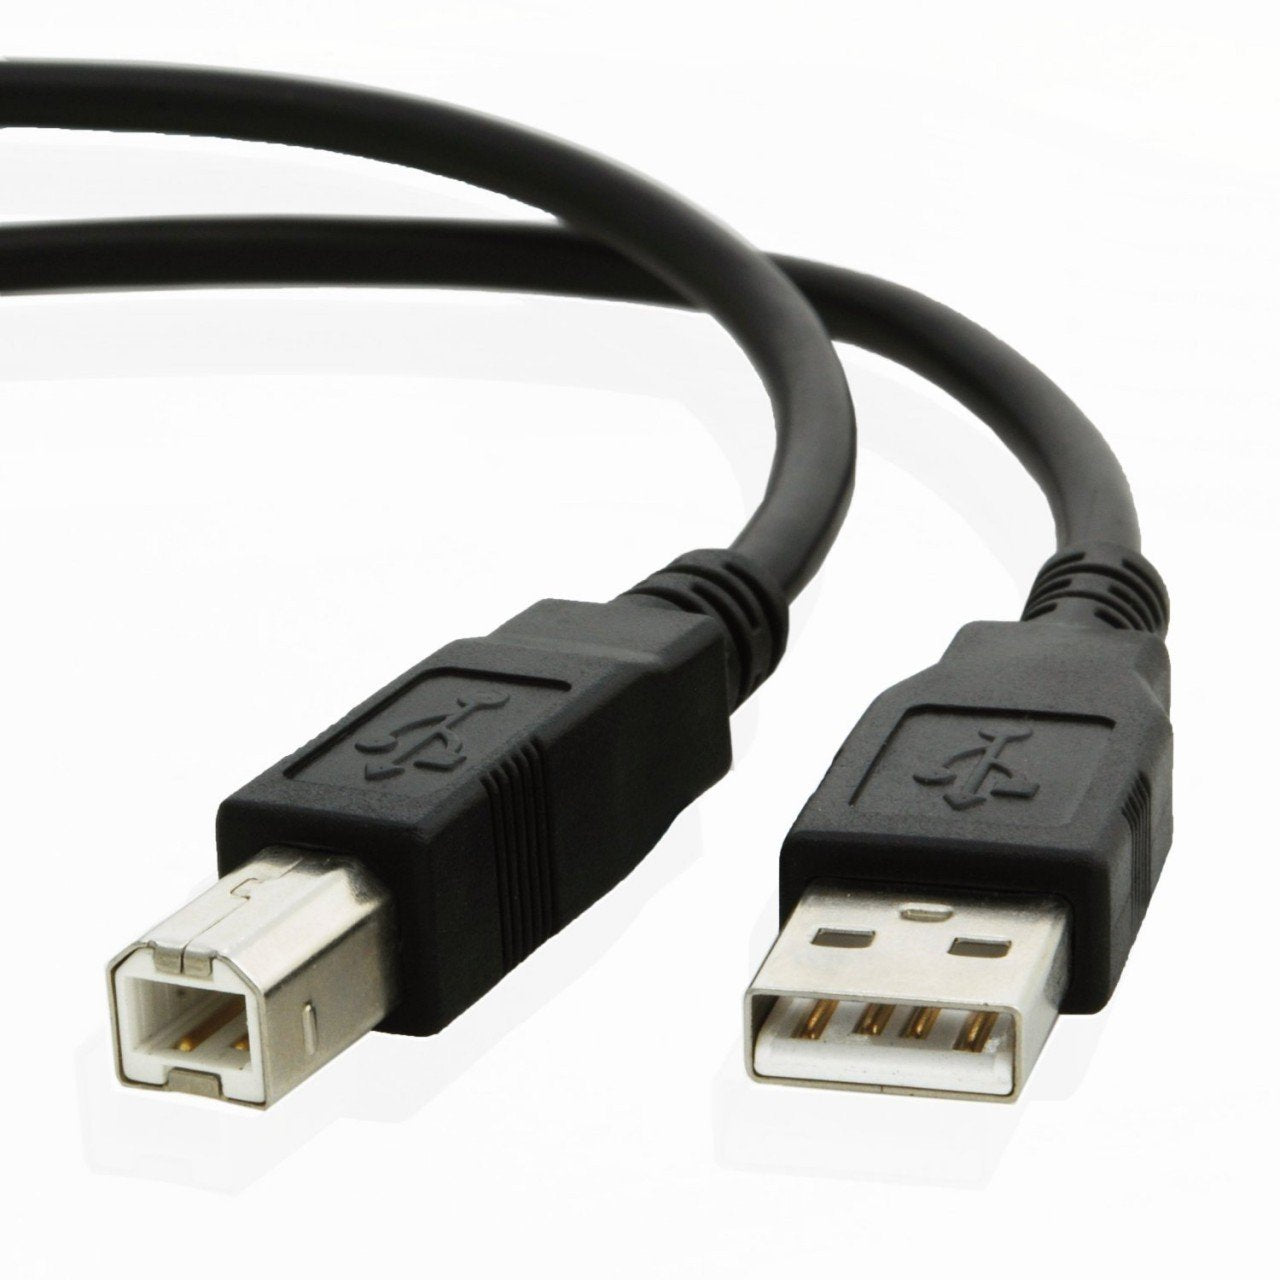 USB cable for Samsung XPRESS M2885FW